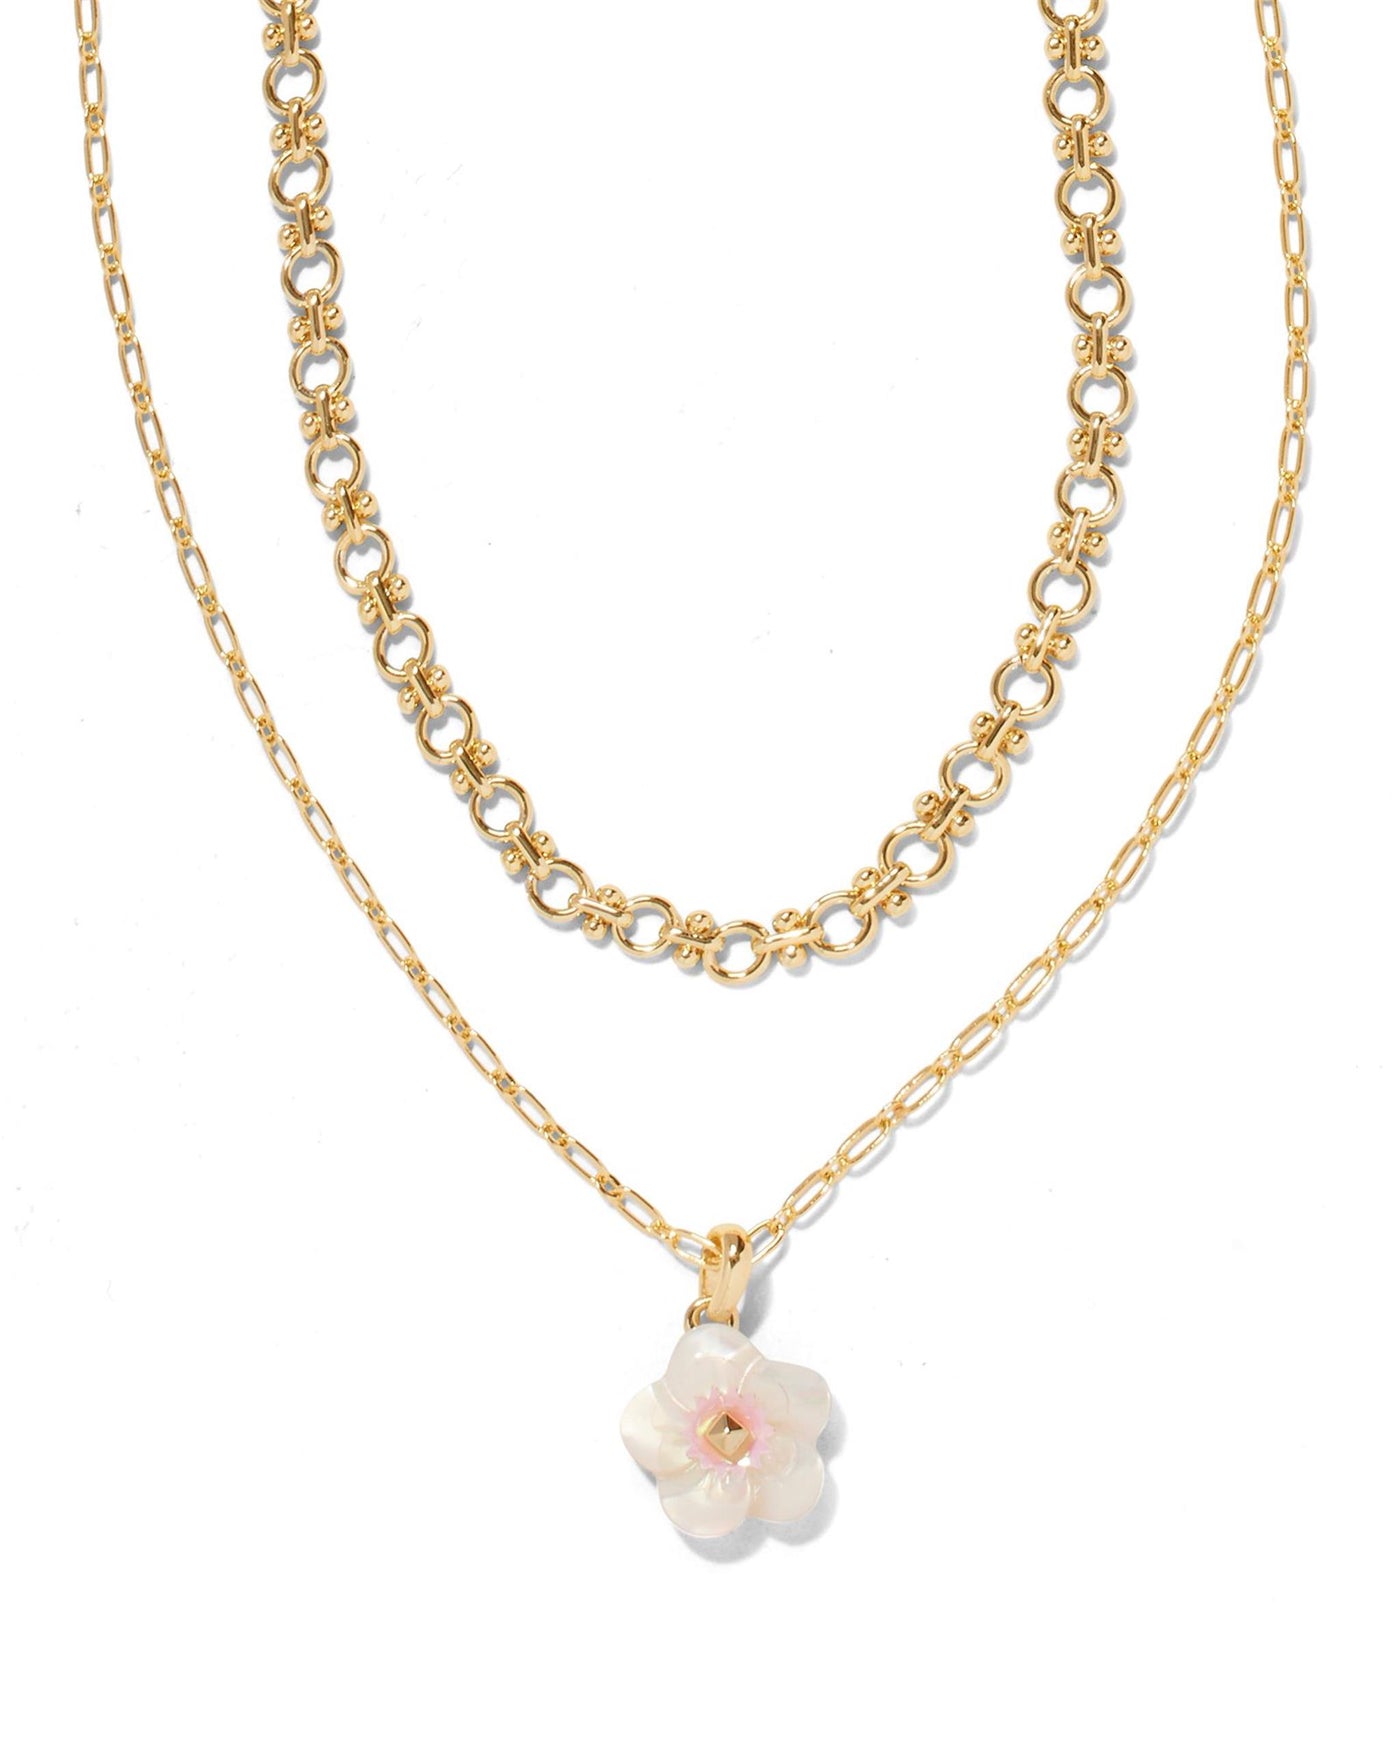 Gold Tone Necklace by Kendra Scott